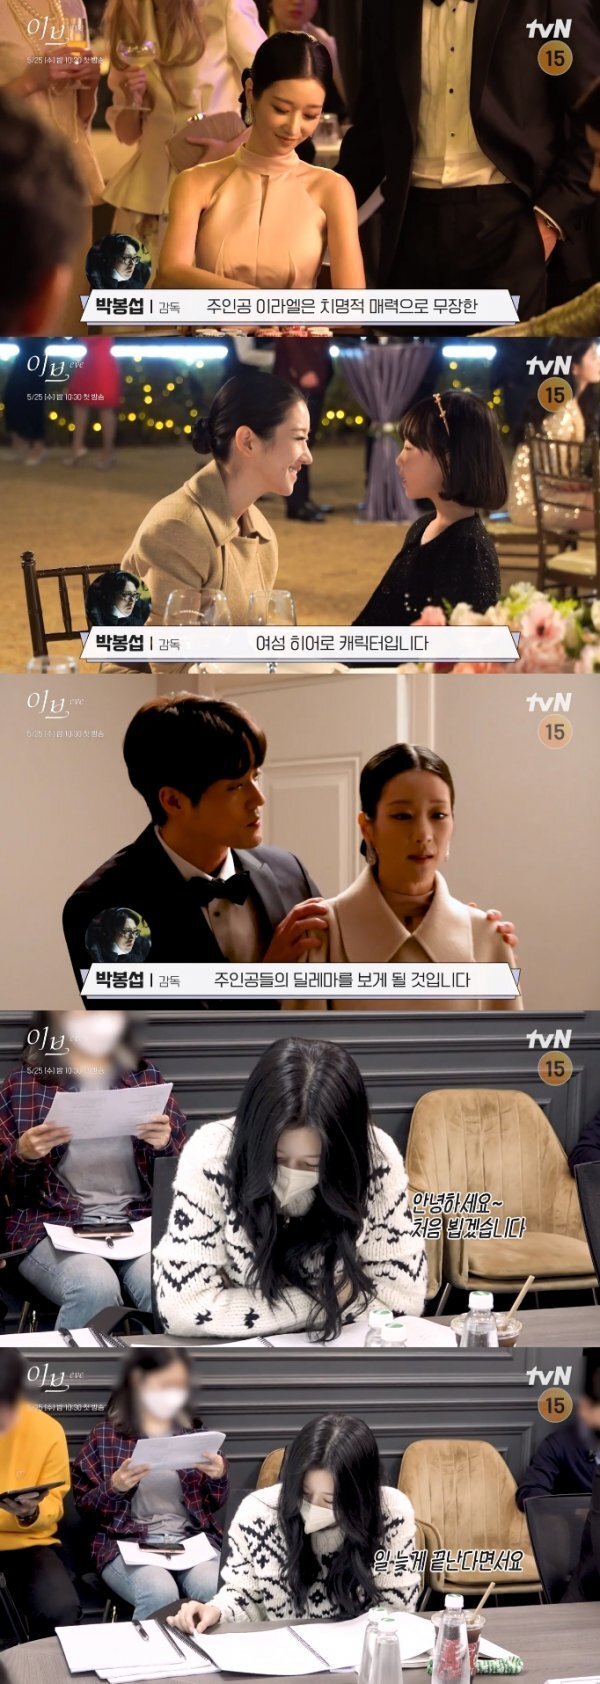 The production team of Eve released a video on the 22nd of the film featuring some of the production machines, some of the script reading sites, and actors who were introduced to Character.Especially in the video, the figure of Seo Ye-ji, who plays the role of the heroine Sean Gelael, attracted attention.In the video, Seo Ye-ji said, Im glad to see you, Seo Ye-ji, who plays the role of Sean Gelael. (Sean Gelael) is deprived of everything in life because of people blind to money.Sean Gelael begins revenge on all walks, and in fact, a lot is entangled at the end of that revenge, he said.There, love, betrayal, and conspiracy eventually show each others desires. (This work) deals with very interesting materials. I hope viewers will enjoy it. Eve is a 13-year design, life-stricken revenge, a revenge drama featuring the most intense and deadly high-quality passion melodies that will bring down 0.1 percent of South Korea.Therefore, there are many eyes toward the return of Seo Ye-ji, who plays the heroine rather than the work itself.Thats what he did last year, too, Seo Ye-ji was named the person behind Kim Jung-hyuns drop-off in the 2018 drama Time.It is said that Seo Ye-ji forced his lover Kim Jung-hyun to act hard toward his opponent.But both Seo Ye-ji and Kim Jung-hyeun denied the rumors and allegations involved, only admitting that they were dating.Kim Jung-hyun also emphasized that getting off time is a health reason.The Gold medalist explained that the previous remarks and actions that he was from a prestigious Spanish university were due to his former agency.Although he was admitted to the prestigious university, he did not attend the school. He also said he had confirmed his pass.However, the pass was not disclosed as an explanation.And then Seo Ye-ji chose to distancing himself from the public for a while, a calculation that would keep him in the dark until the controversy and suspicions were quiet.And when the story about the Eve formation began to emerge, I apologized in February.Seo Ye-ji said through his agency Gold Medalist, I am sincerely sorry to convey my heart too late.I have had time to look back at myself, seeing the rebukes and stories I have given me, and I am sincerely sorry that my lack has caused many people to feel sorry for me.I apologize again for the many disappointments. Everything is from my immaturity.I will try to be more careful and mature in the future, he said.What will Seo Ye-ji tell in the official appearance (Eve production presentation)? It is noteworthy that Seo Ye-ji and his company Gold medalists return plan (plan) will fit.